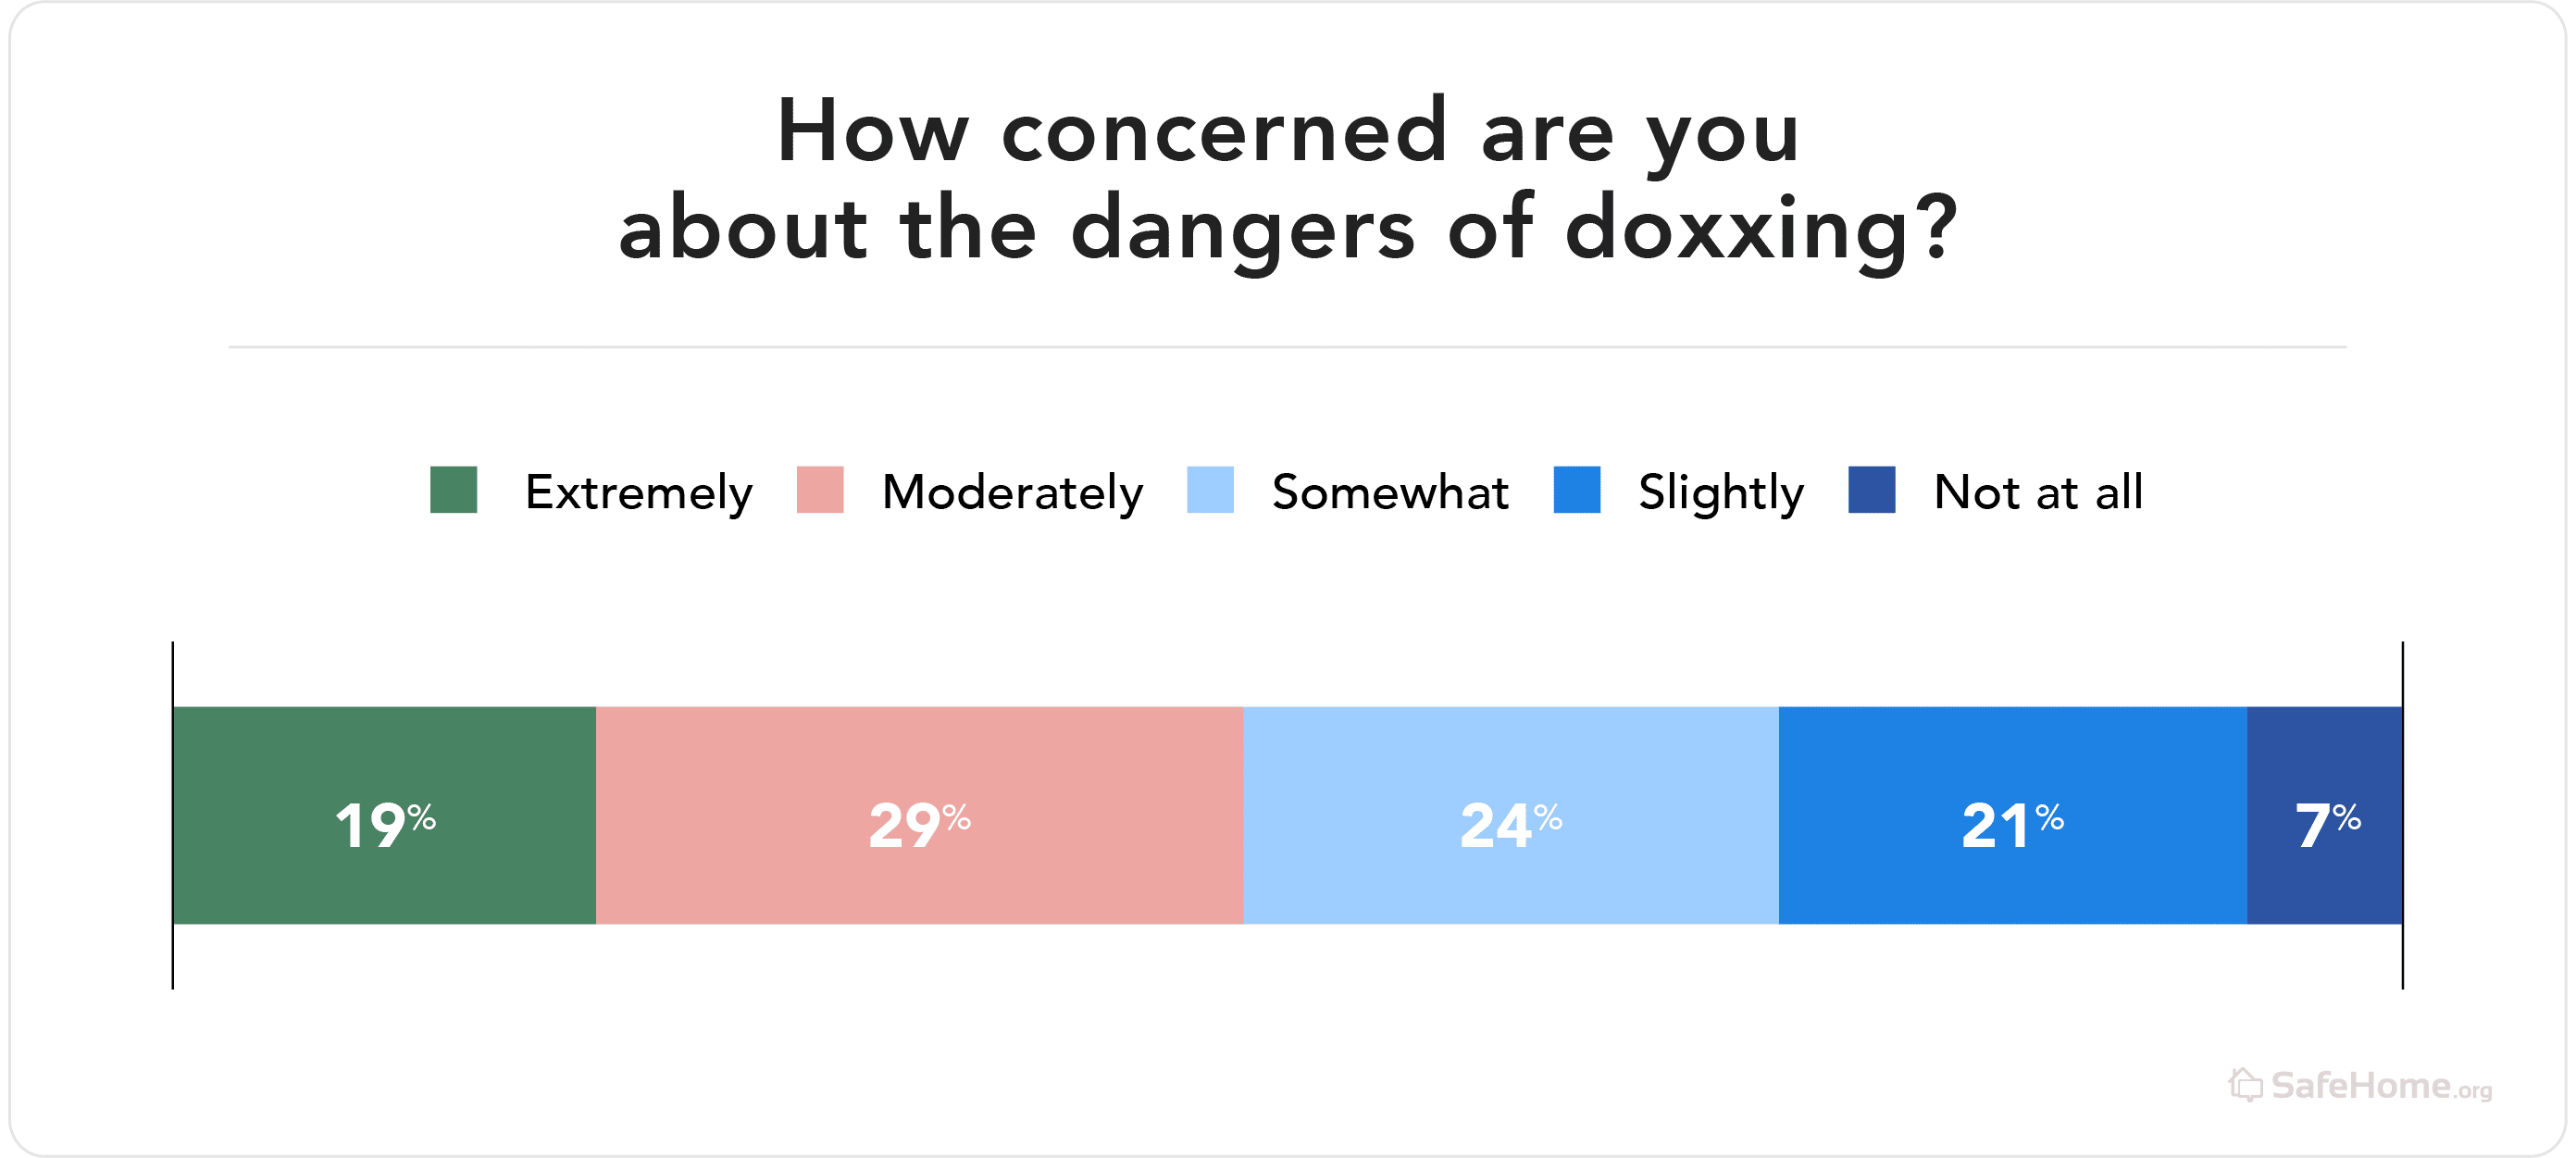 How concerned are you about doxxing